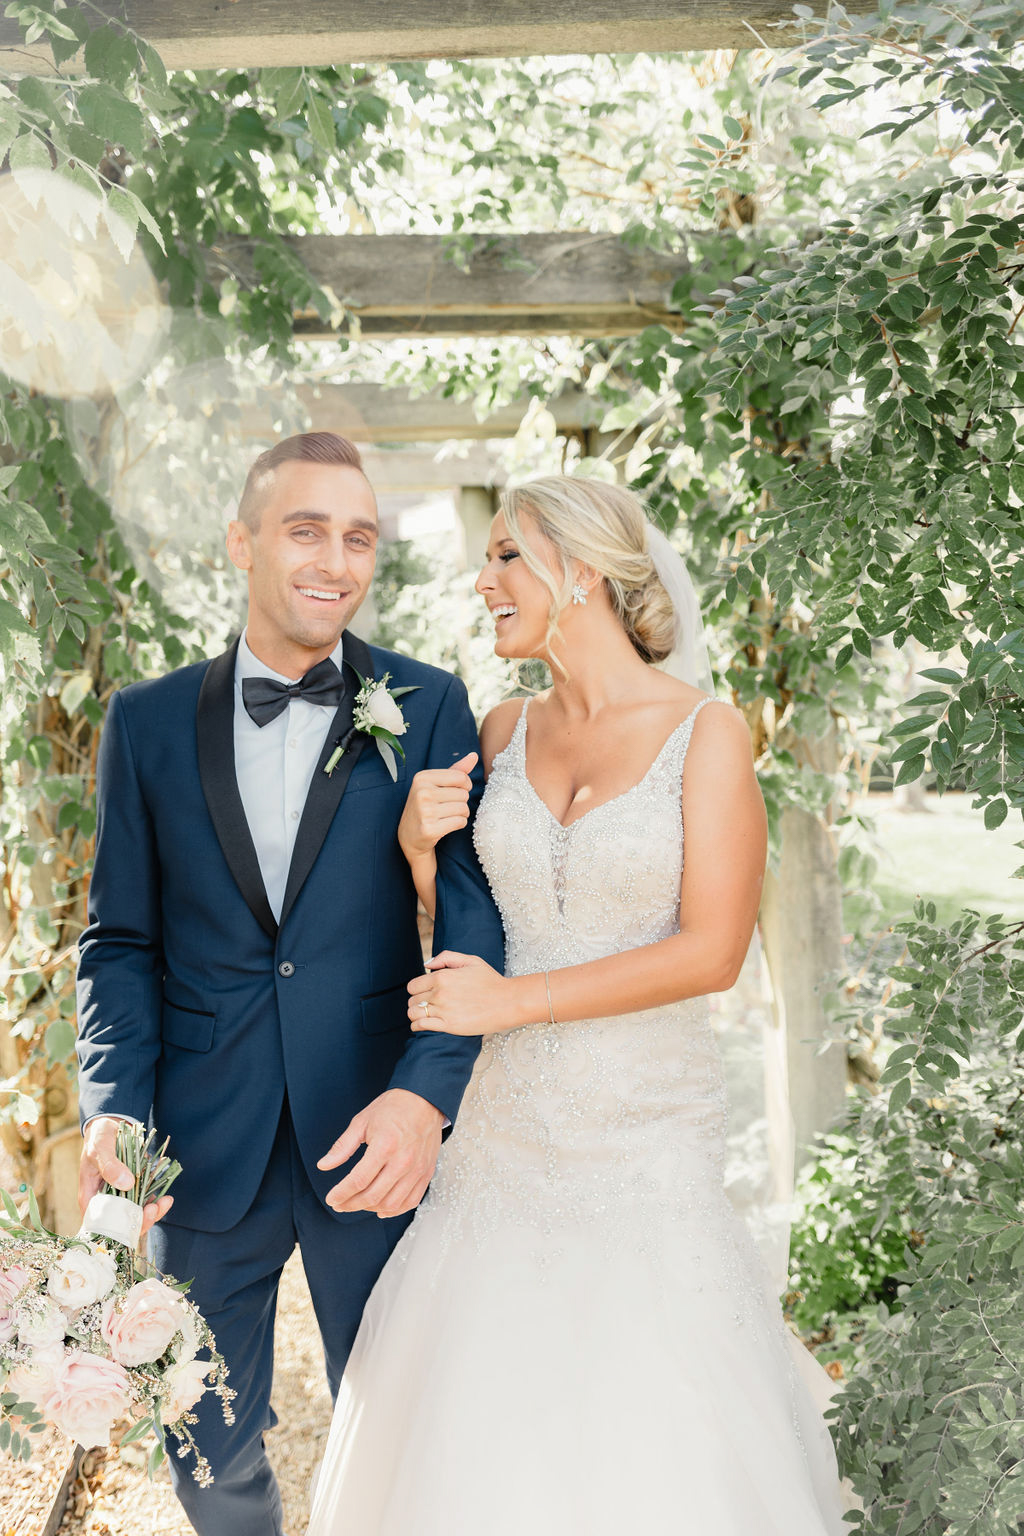 This beautiful Ohio wedding is a like a dream! We love the beautiful pink touches, gorgeous flowers, soft light, and contagious smiles from this adorable couple. If you're leaning towards a blush wedding of your own, you need to check this one out! This couple knows how to plan an amazing wedding! 